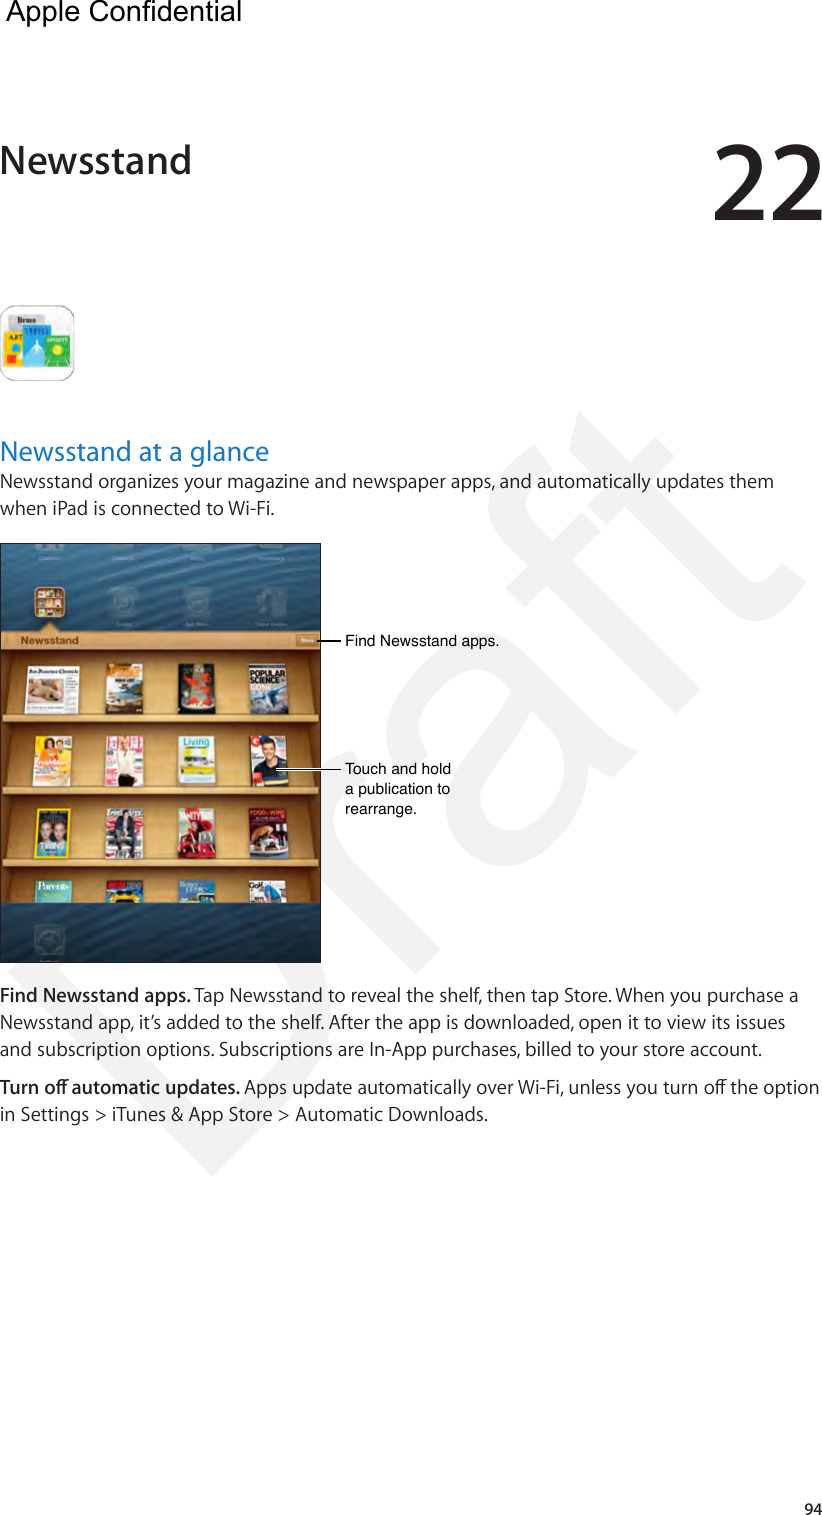 2294Newsstand at a glanceNewsstand organizes your magazine and newspaper apps, and automatically updates them when iPad is connected to Wi-Fi.Find Newsstand apps.Find Newsstand apps.Touch and hold a publication to rearrange.Touch and hold a publication to rearrange.Find Newsstand apps. Tap Newsstand to reveal the shelf, then tap Store. When you purchase a Newsstand app, it’s added to the shelf. After the app is downloaded, open it to view its issues and subscription options. Subscriptions are In-App purchases, billed to your store account.in Settings &gt; iTunes &amp; App Store &gt; Automatic Downloads.Newsstand  Apple Confidential Draft